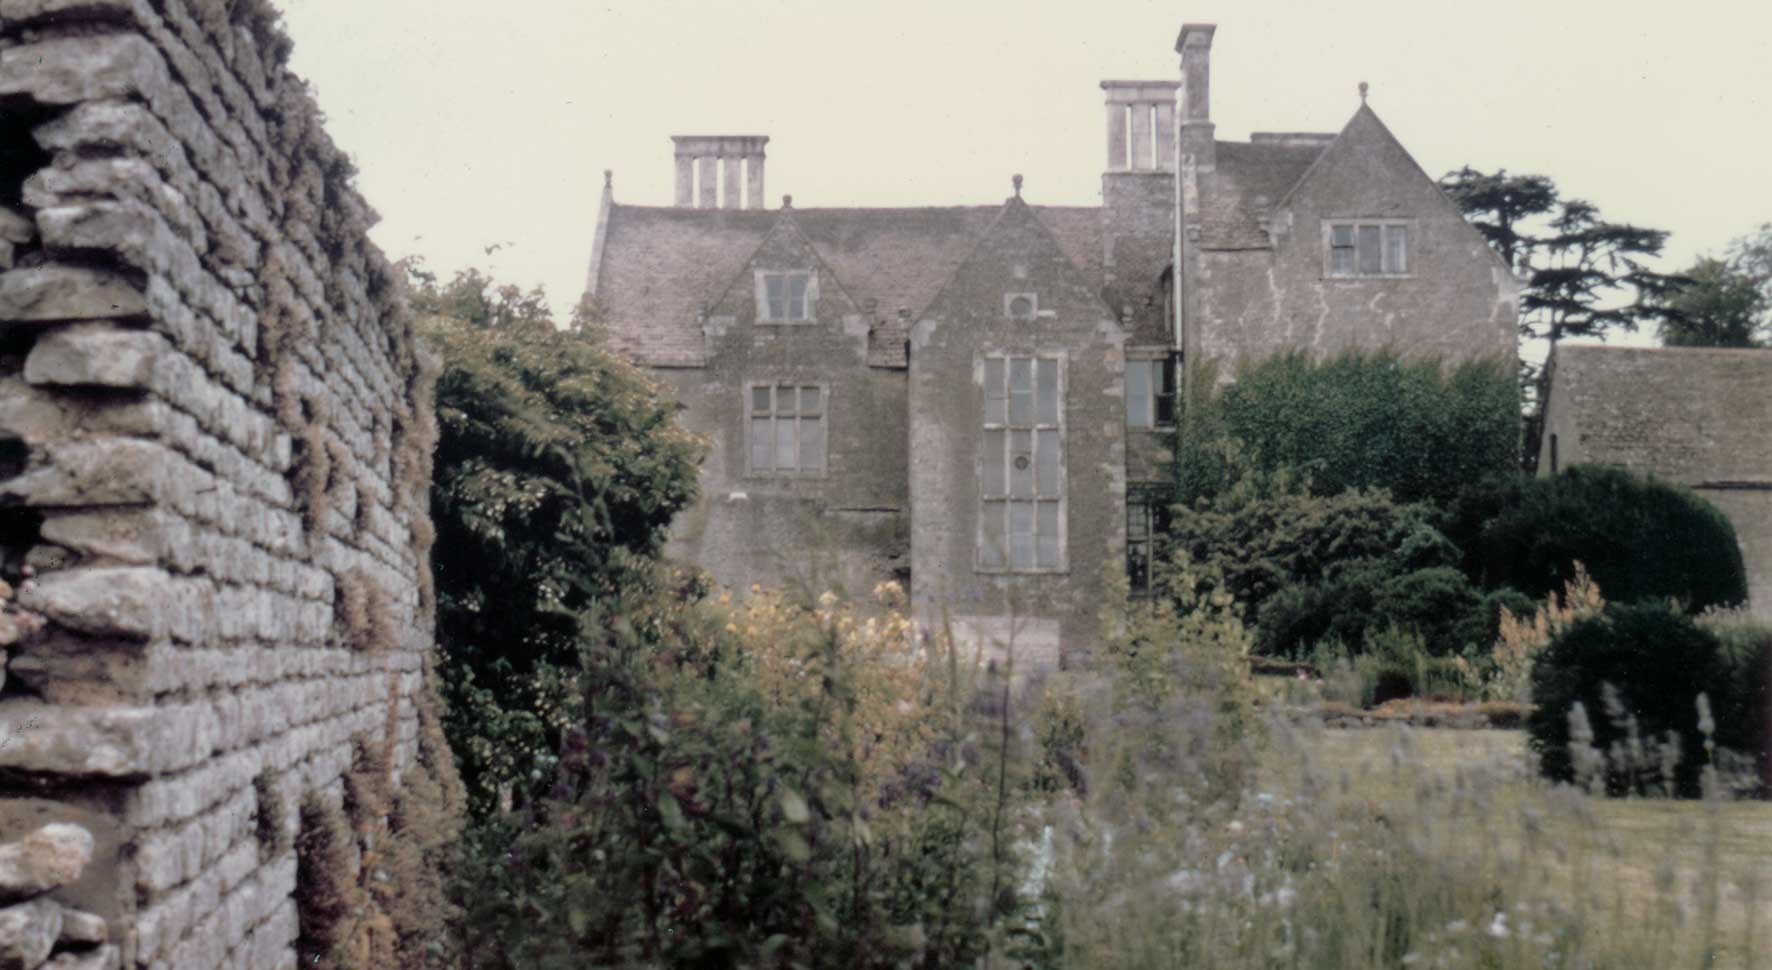 Cotterstock Hall 1970 back view